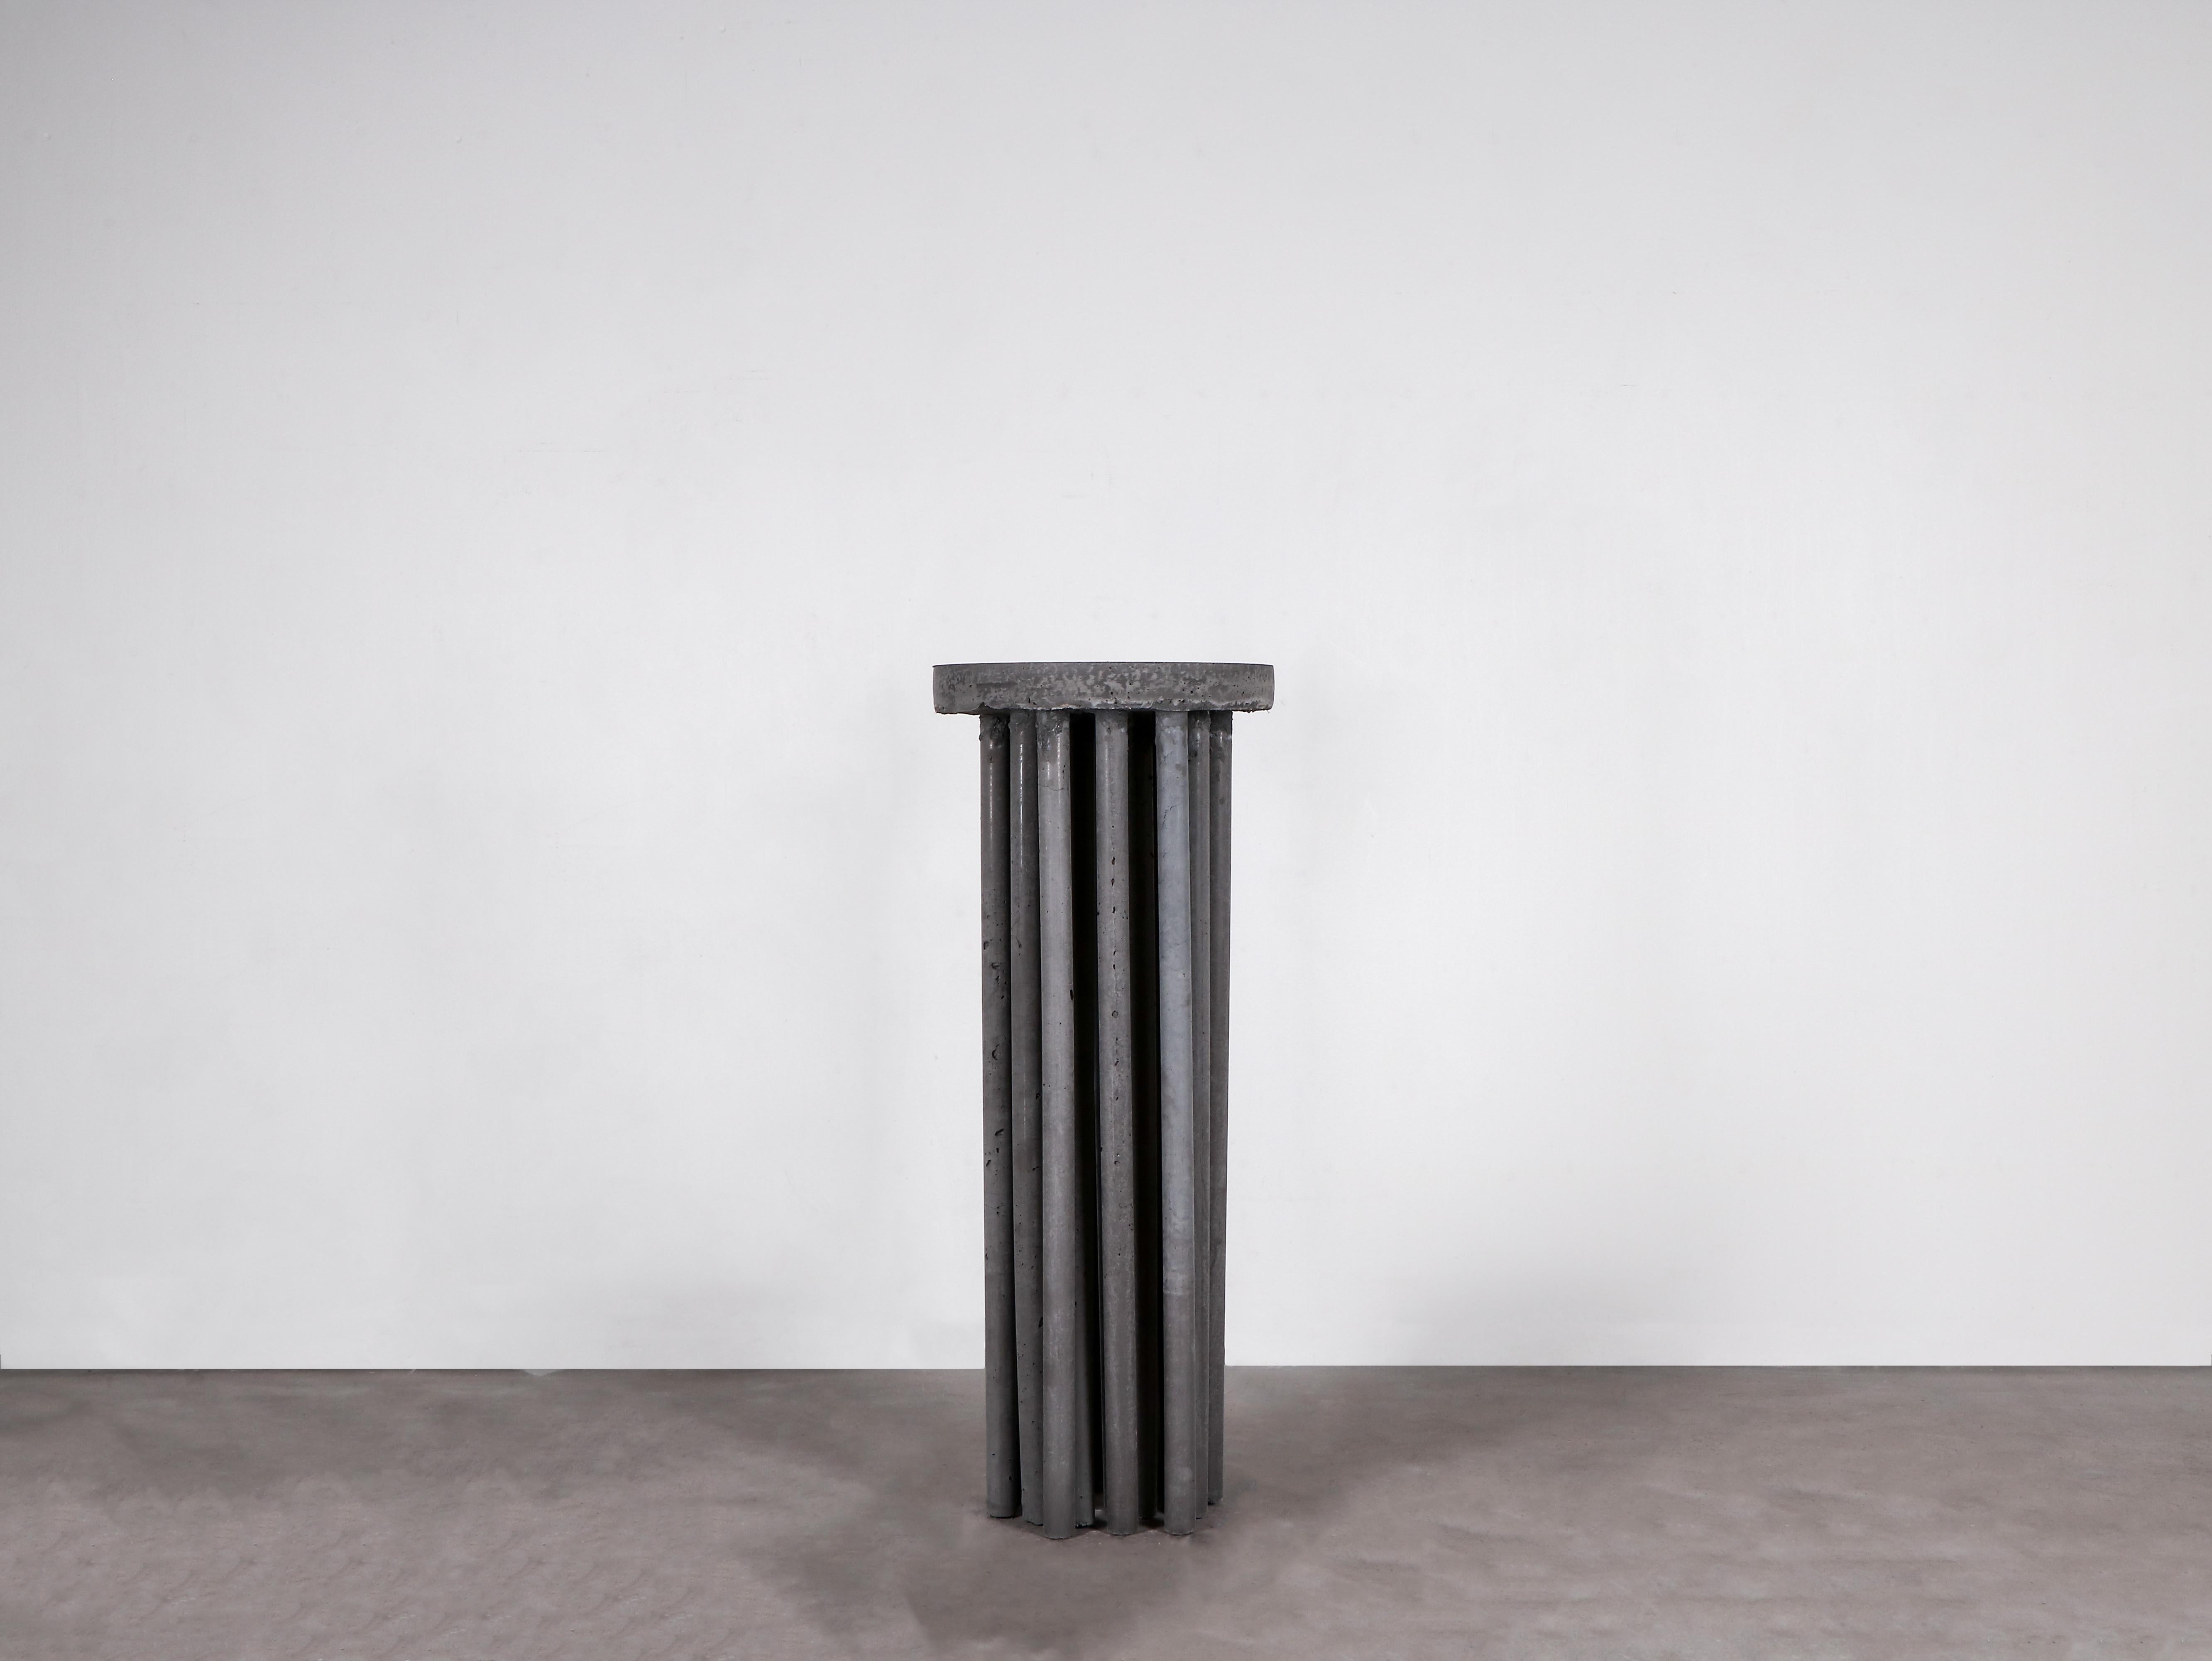 Dop Plinth by Lucas Morten
Limited edition of 6 + 1 AP
Signed
Dimensions: W40 x H100 cm
Material: Concrete

Objects comes with a 